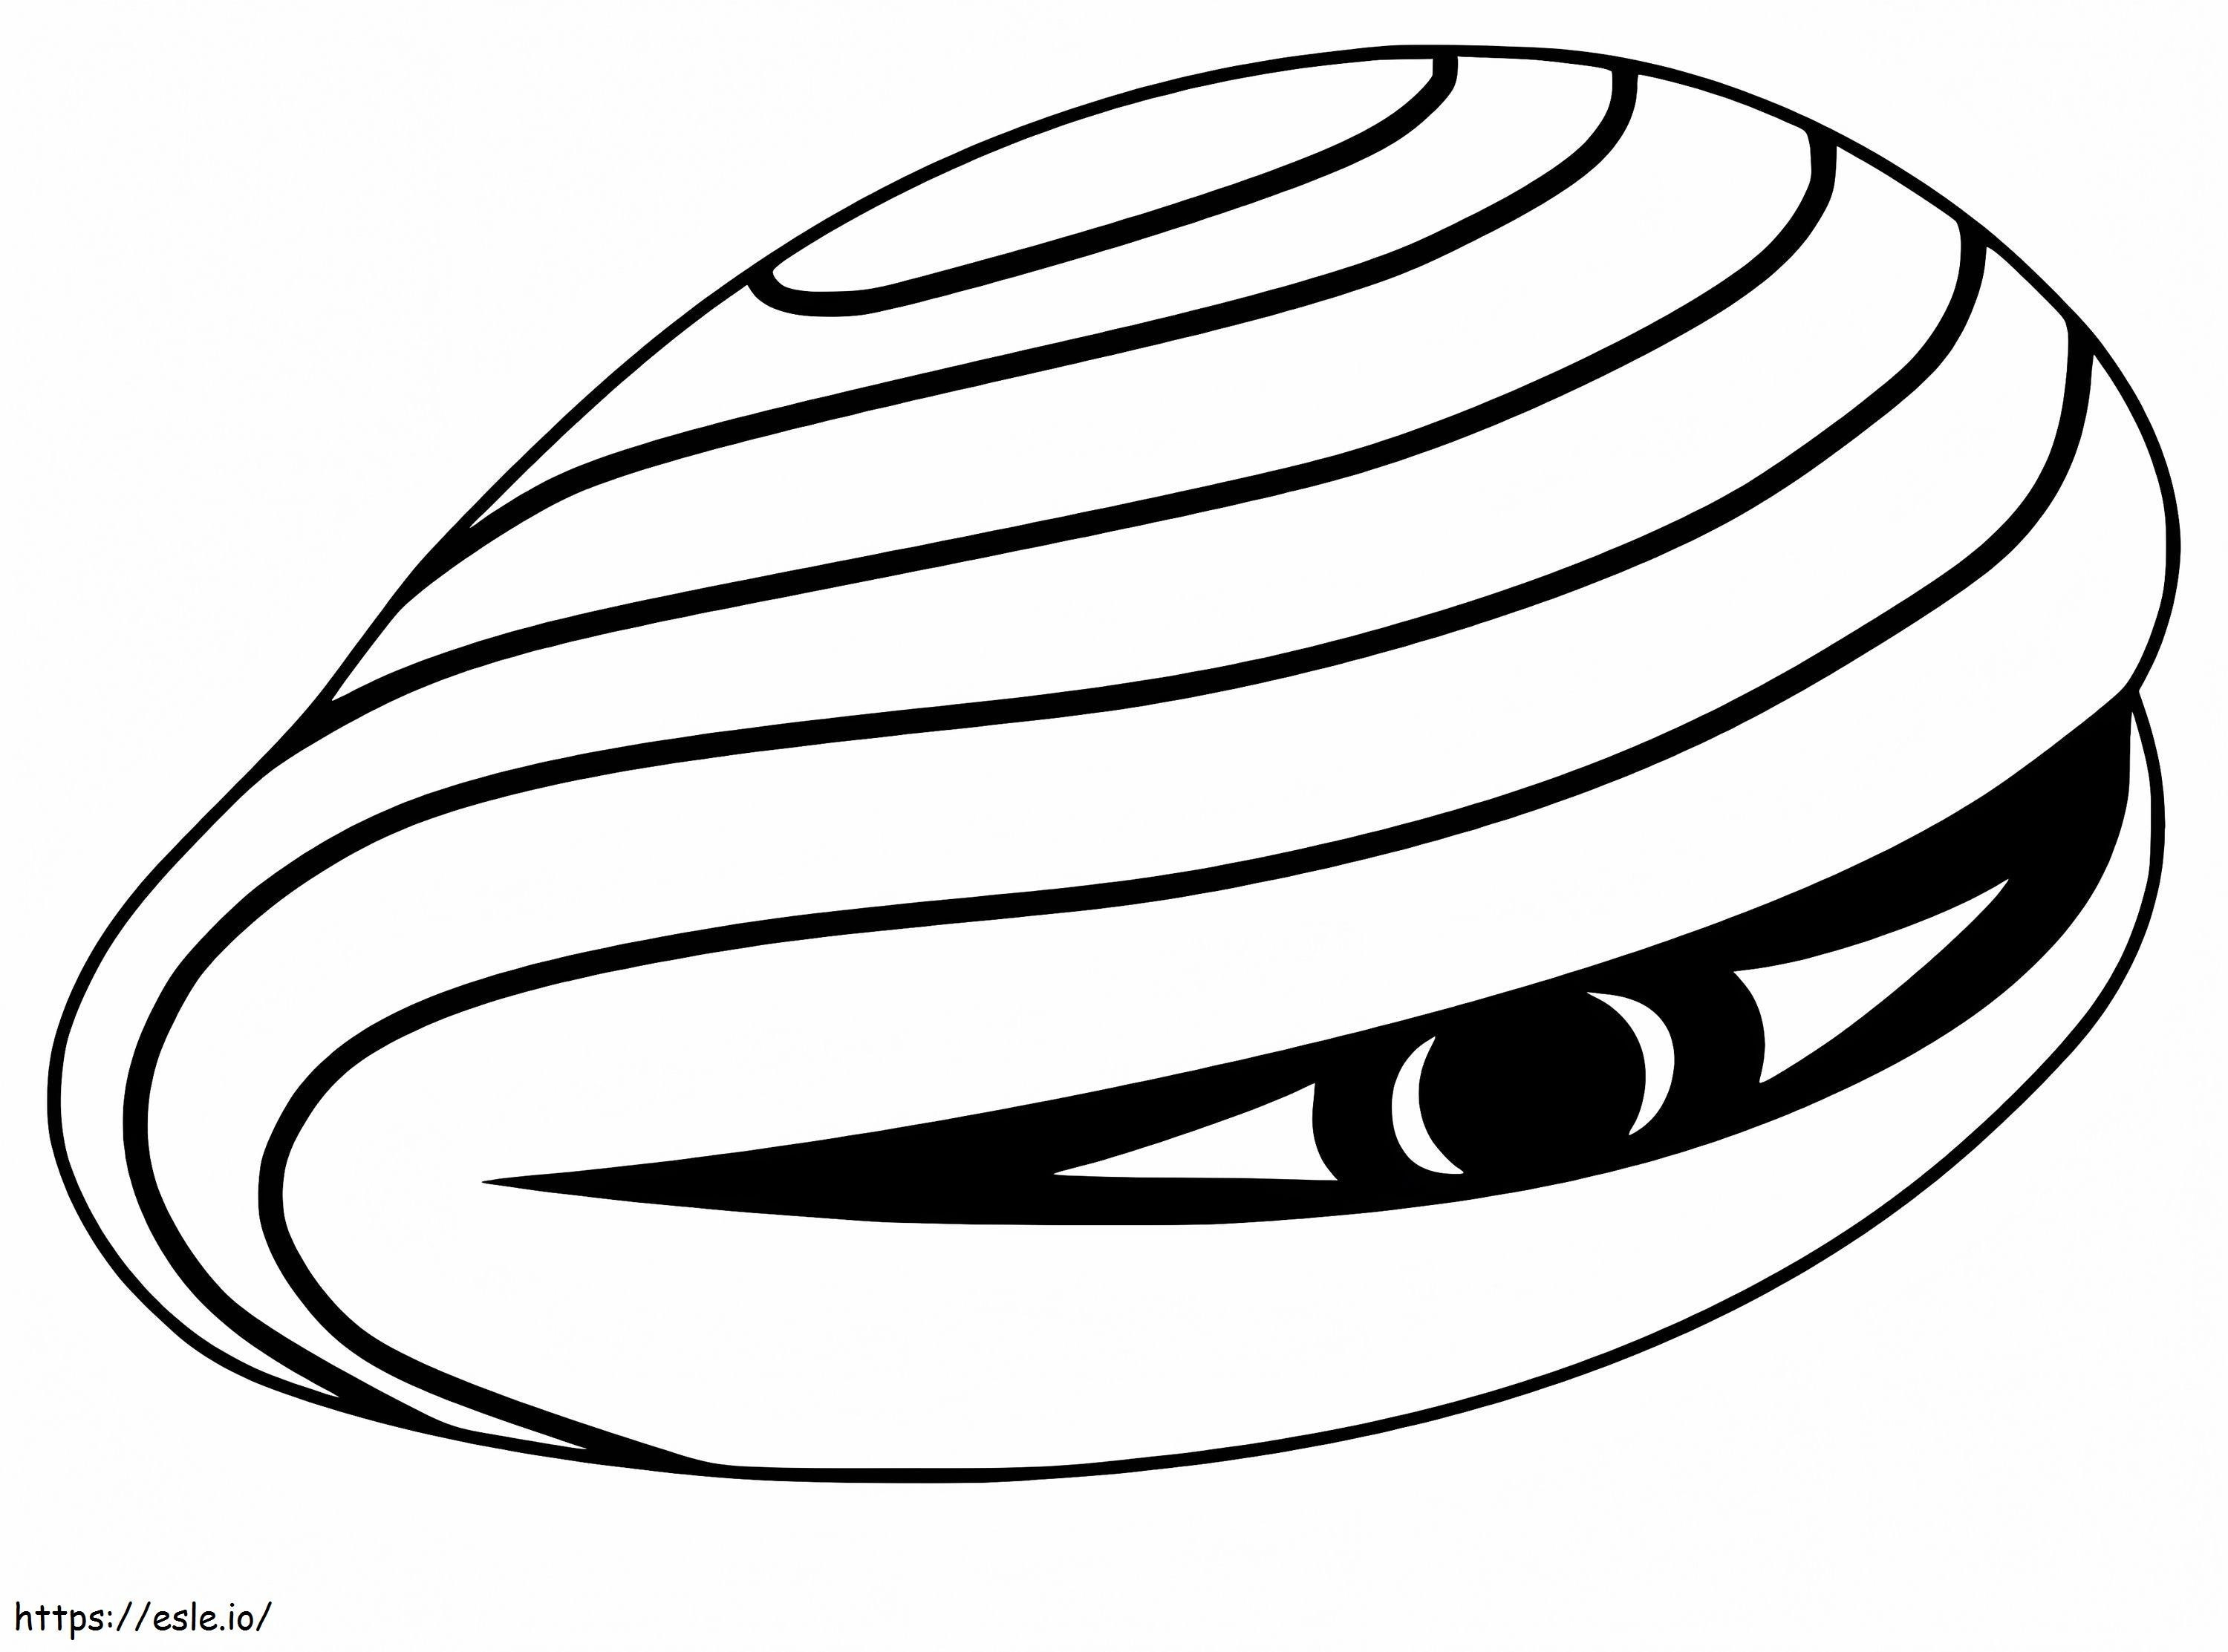 Free Clam coloring page